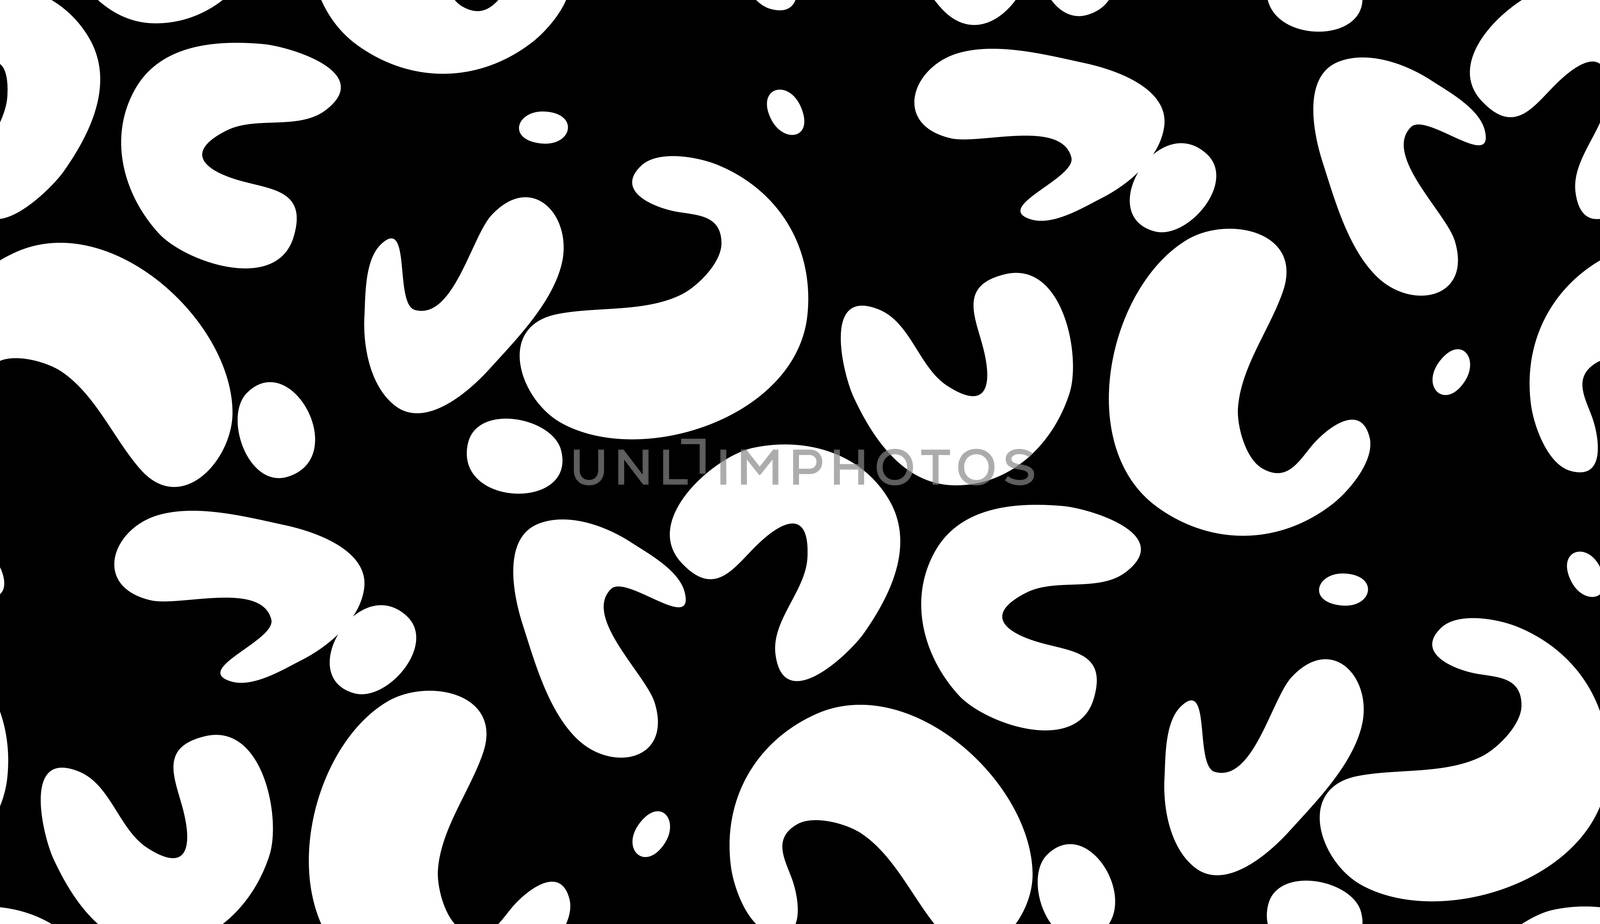 Seamless pattern of white abstract fortune cookie shapes